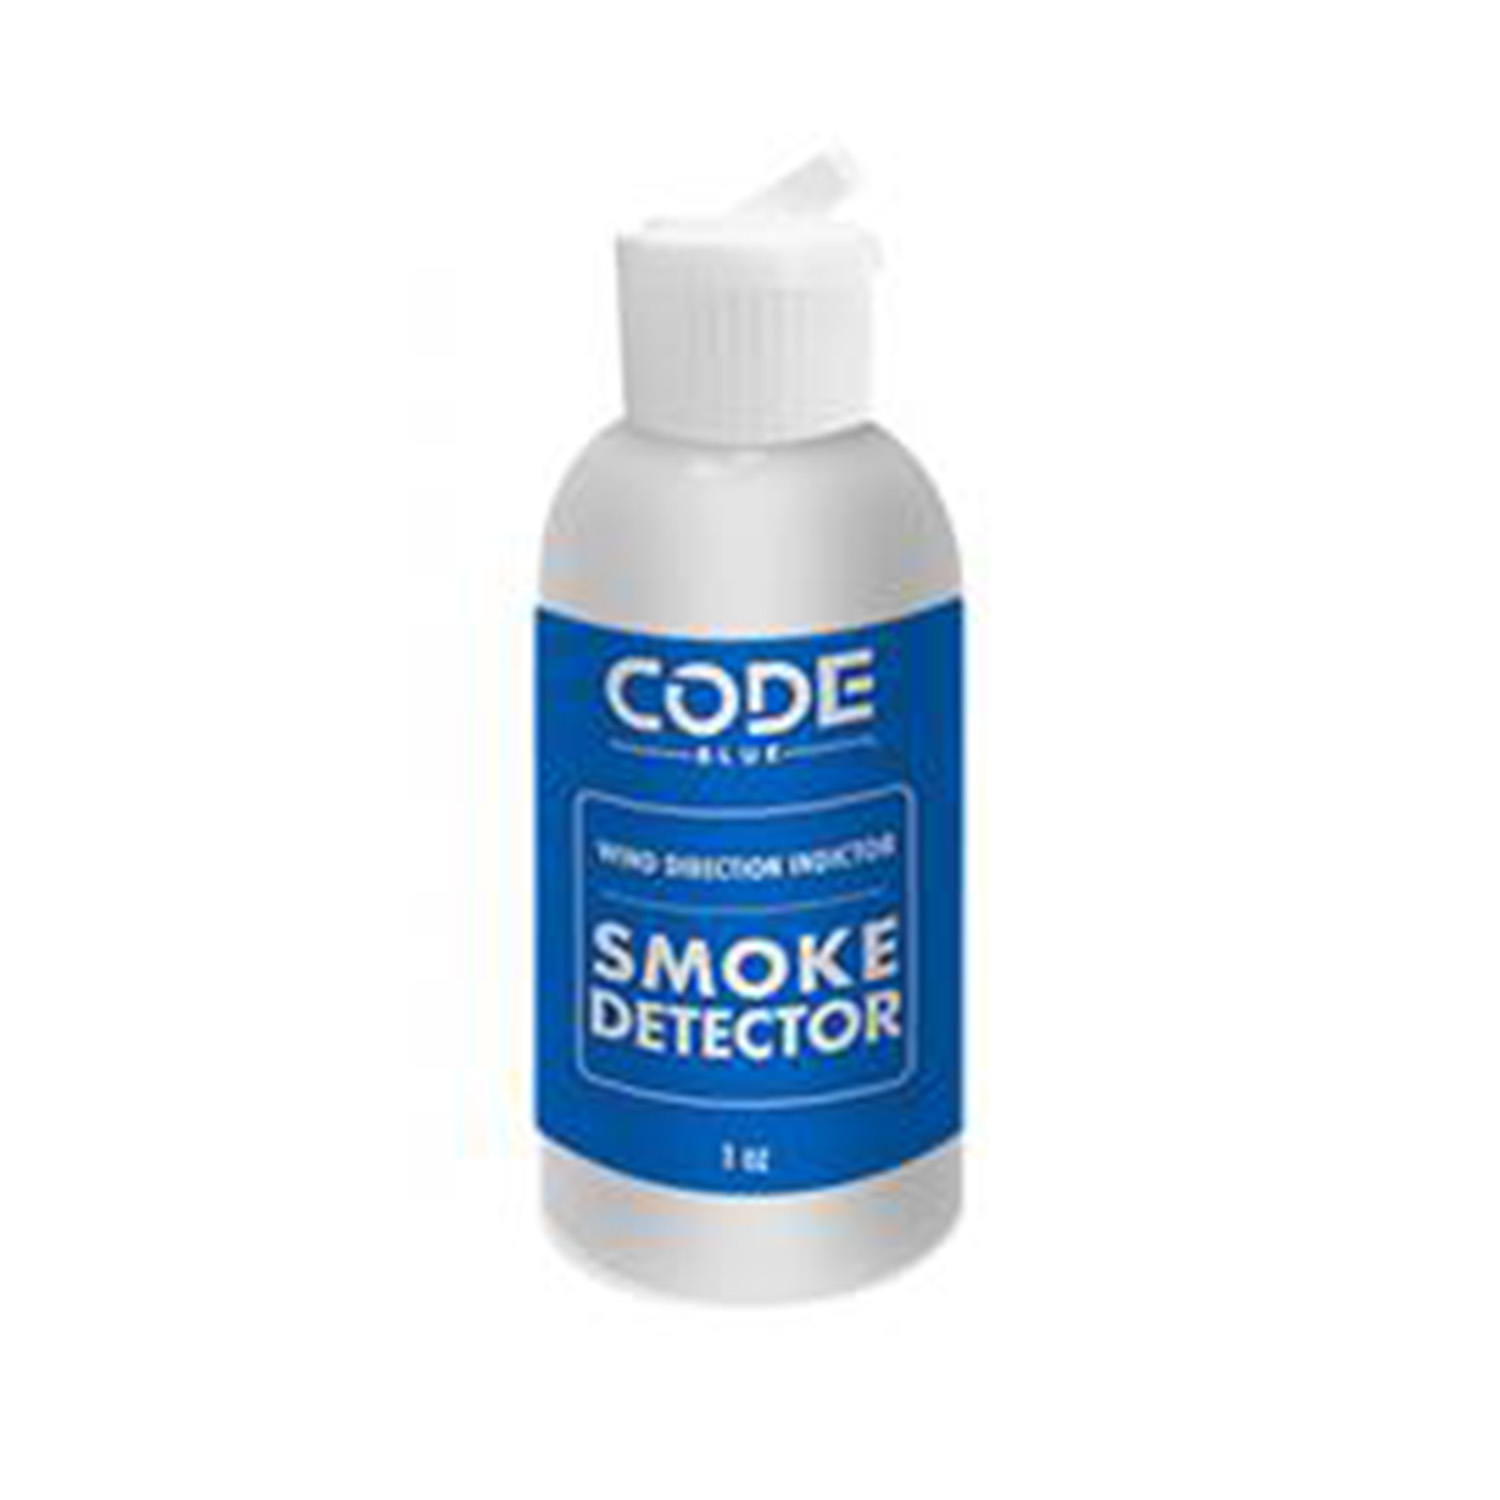 Code Blue Smoke Detector - Hunting Accessories